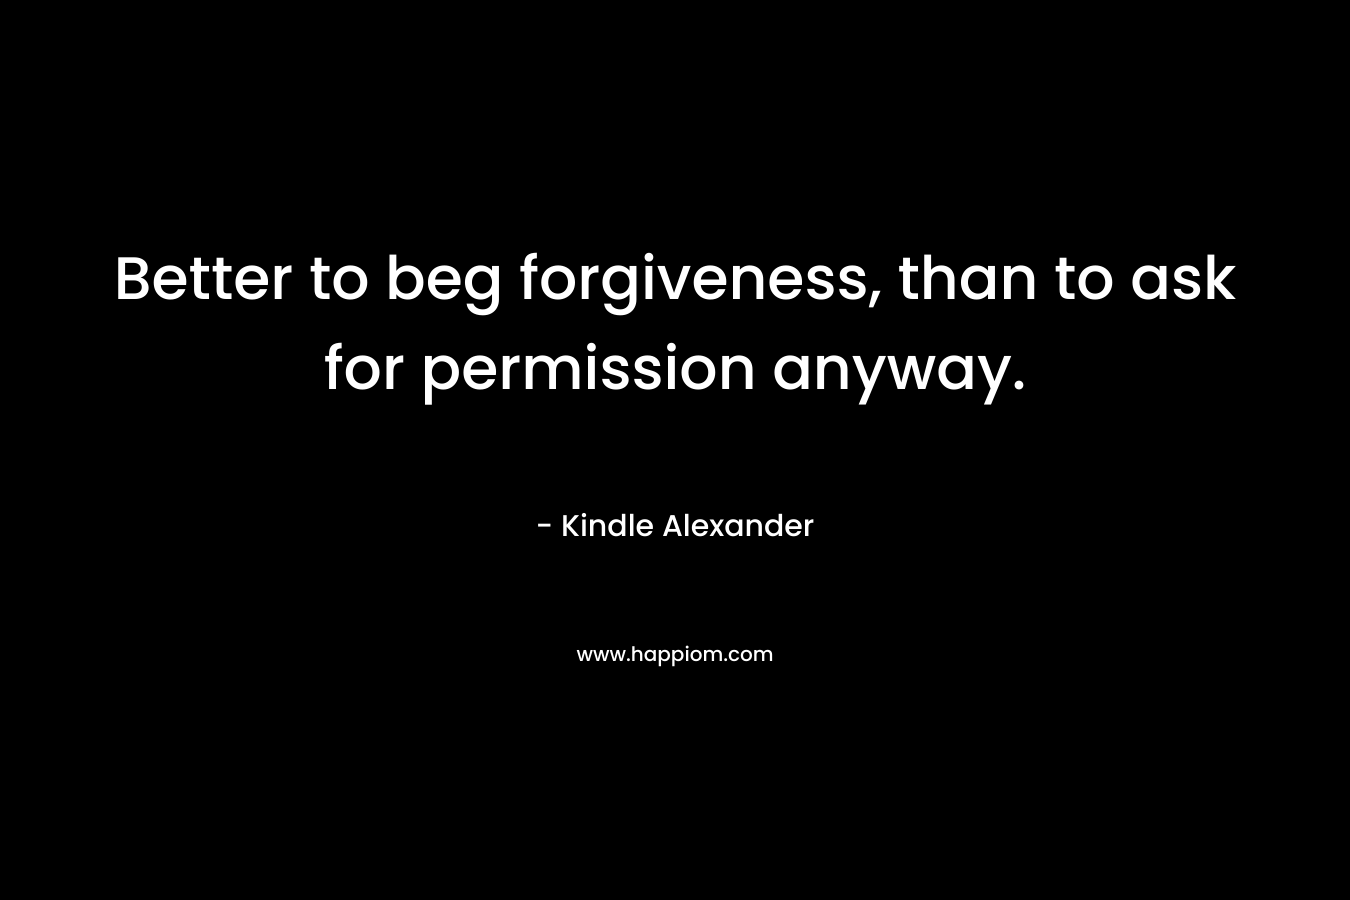 Better to beg forgiveness, than to ask for permission anyway. – Kindle Alexander